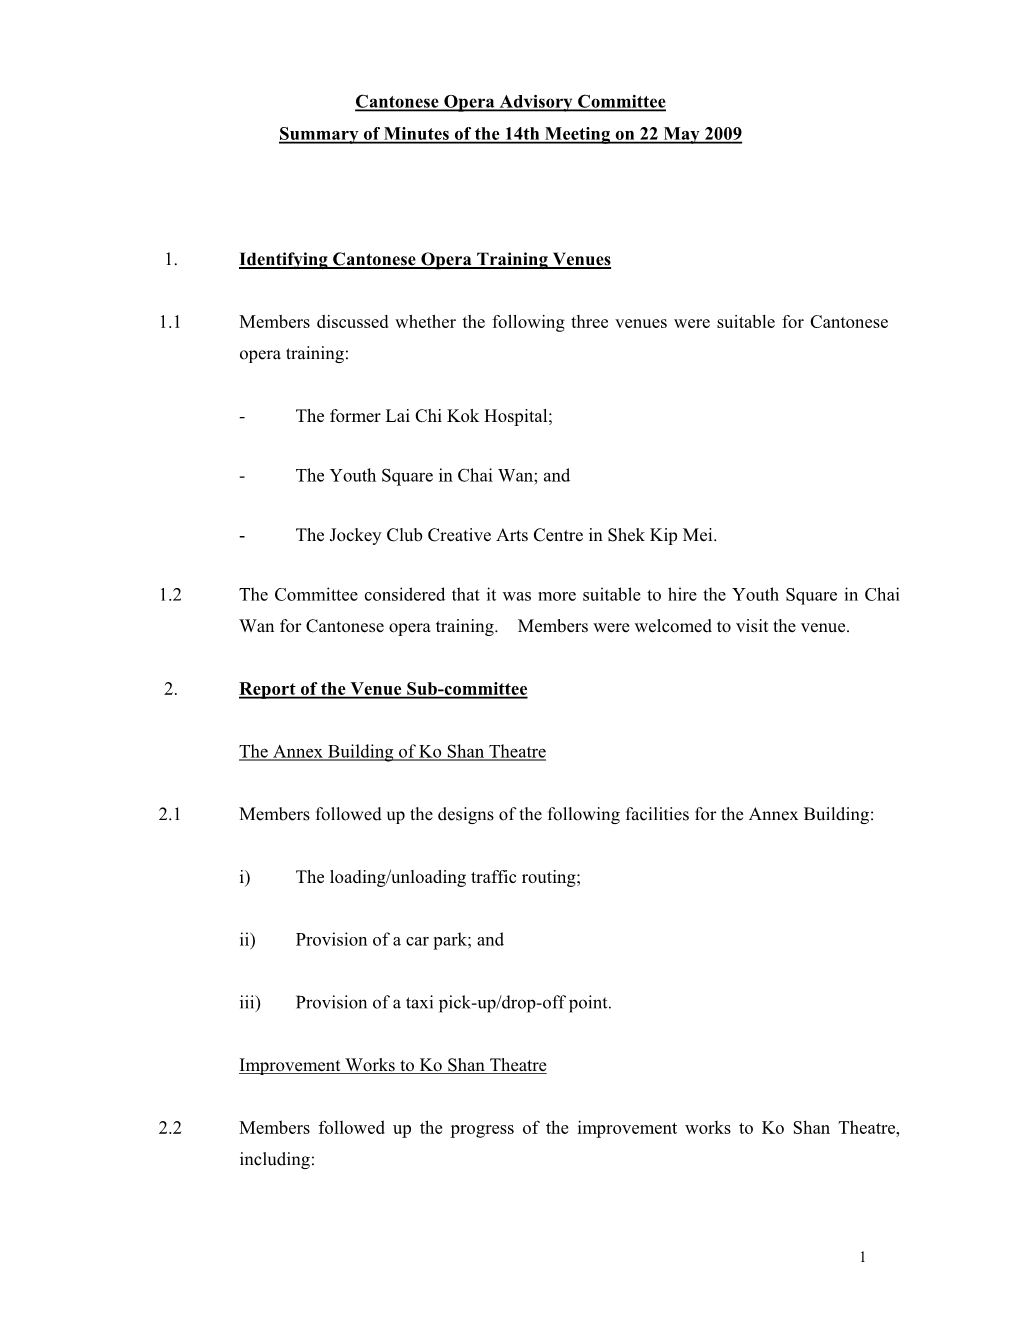 Summary of Minutes of the 14Th Meeting on 22 May 2009